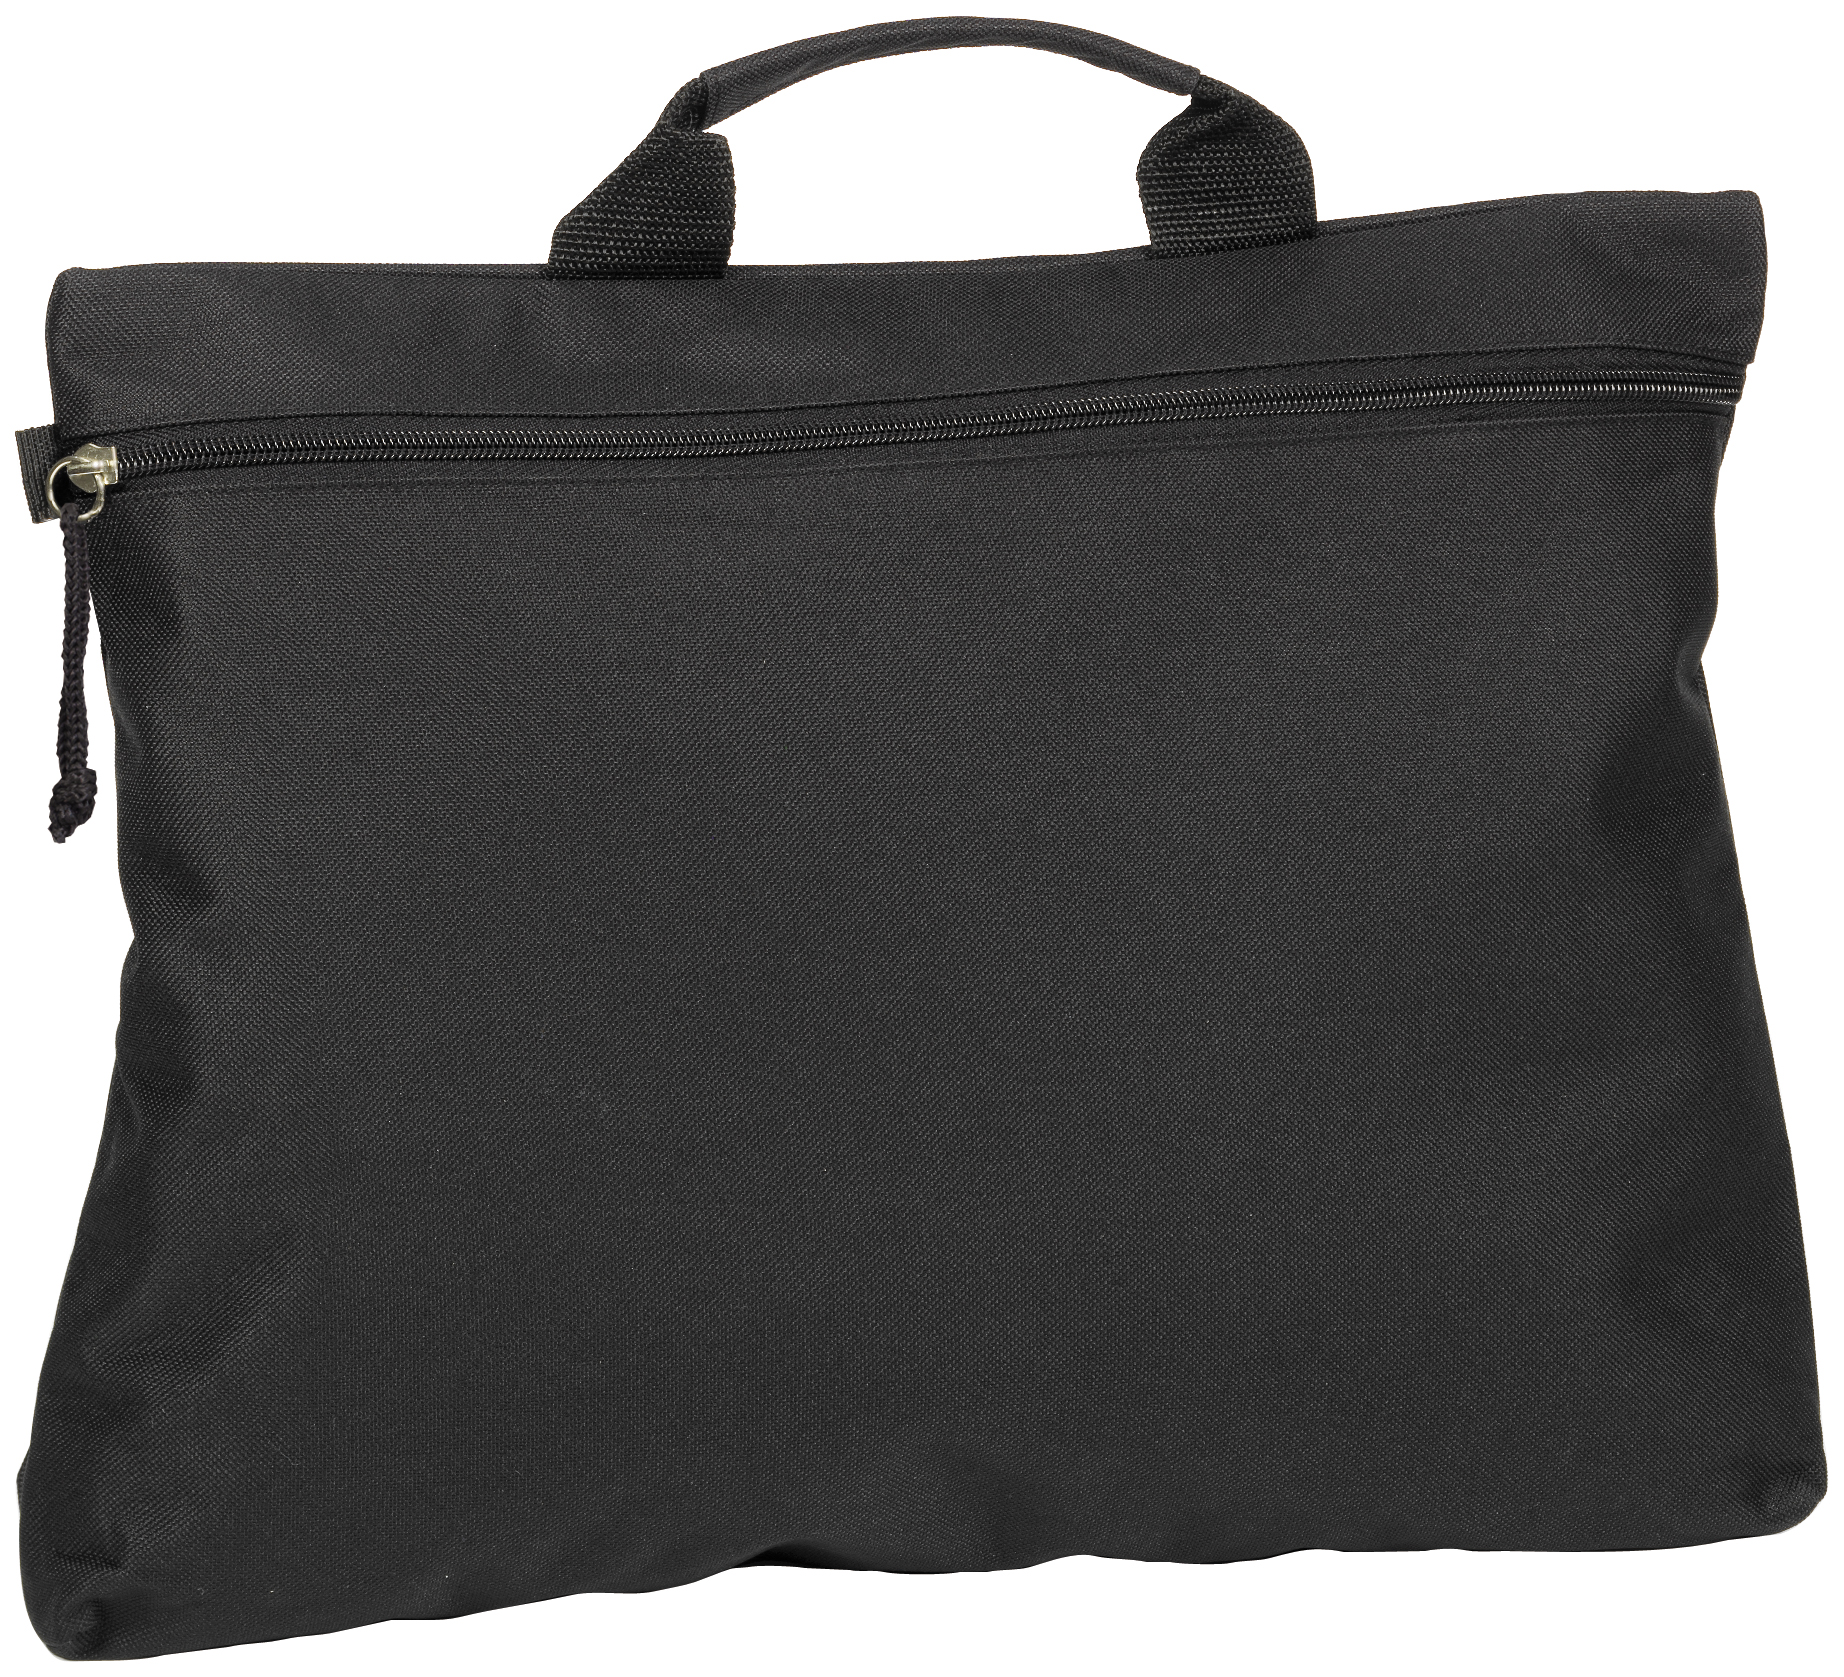 Promotional Swale Document Bag